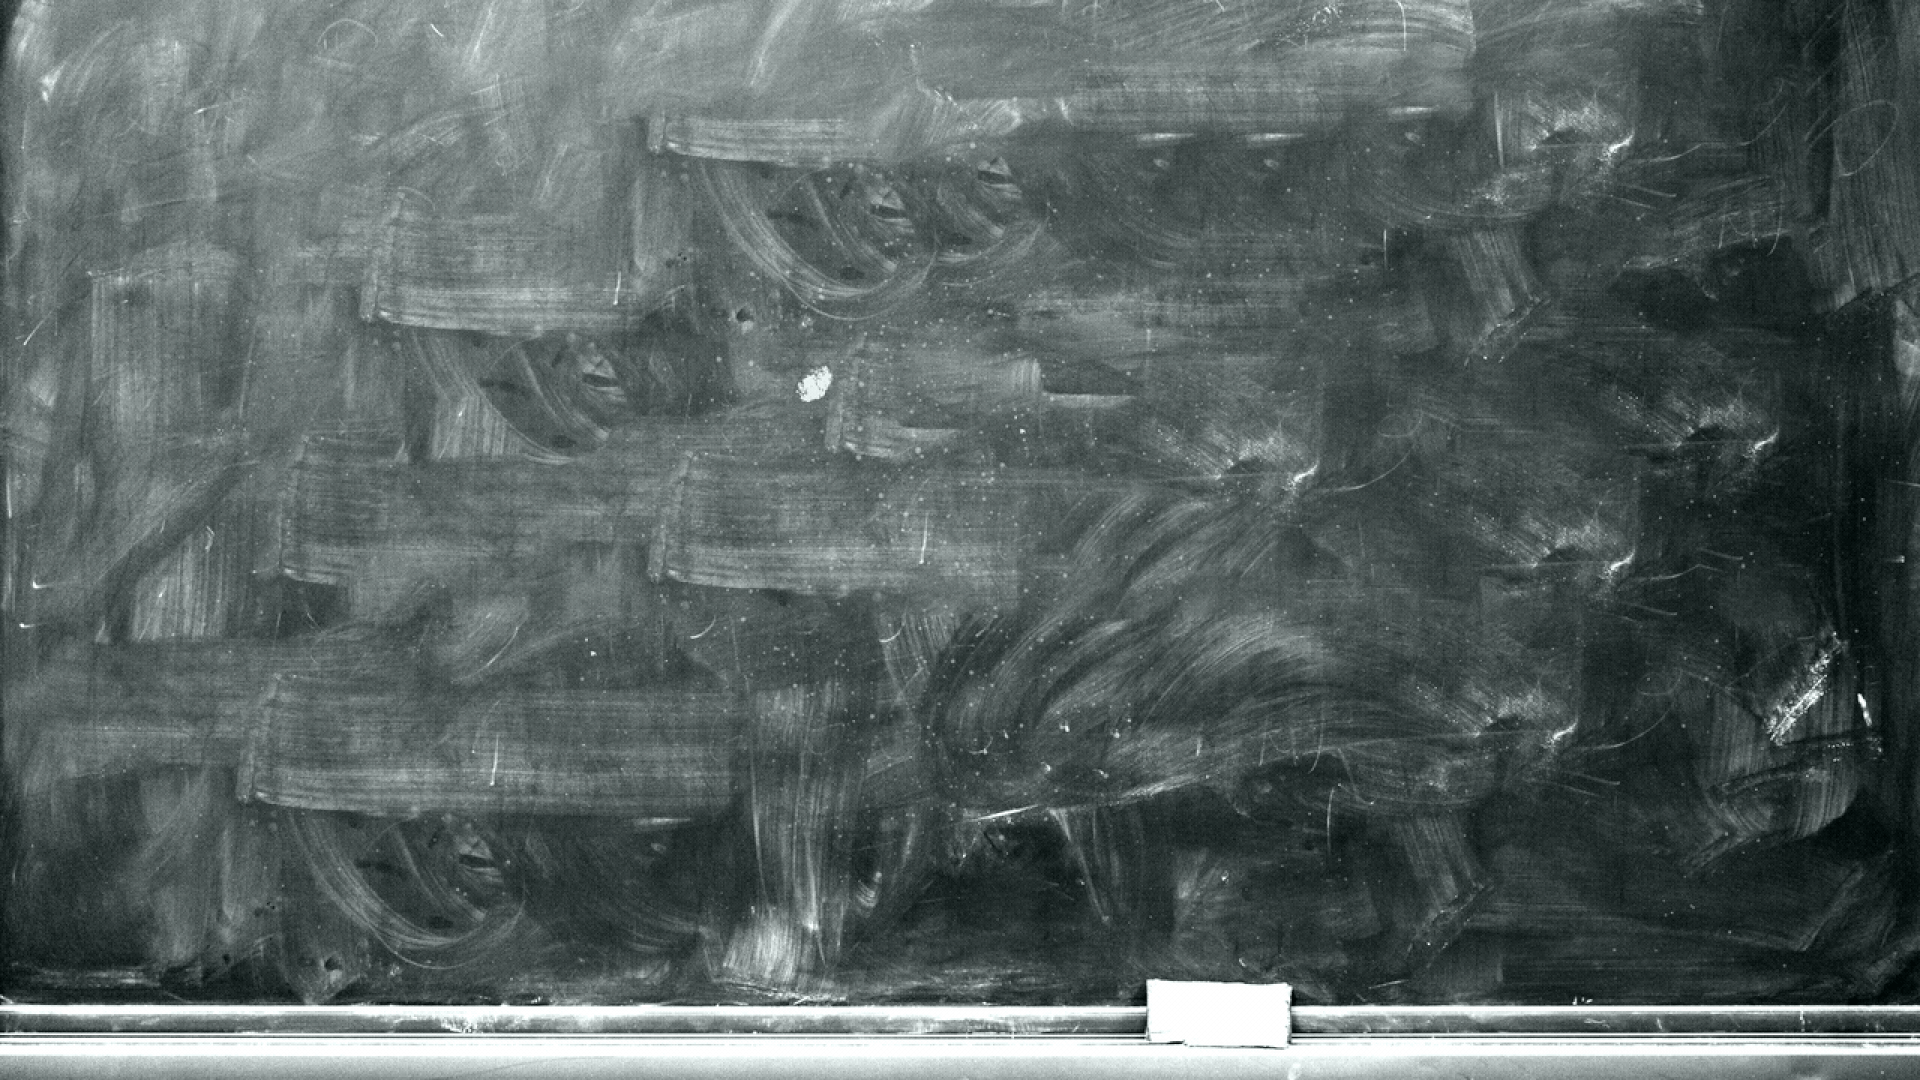 Illustration of a series of successively larger police badges being drawn on a chalkboard.